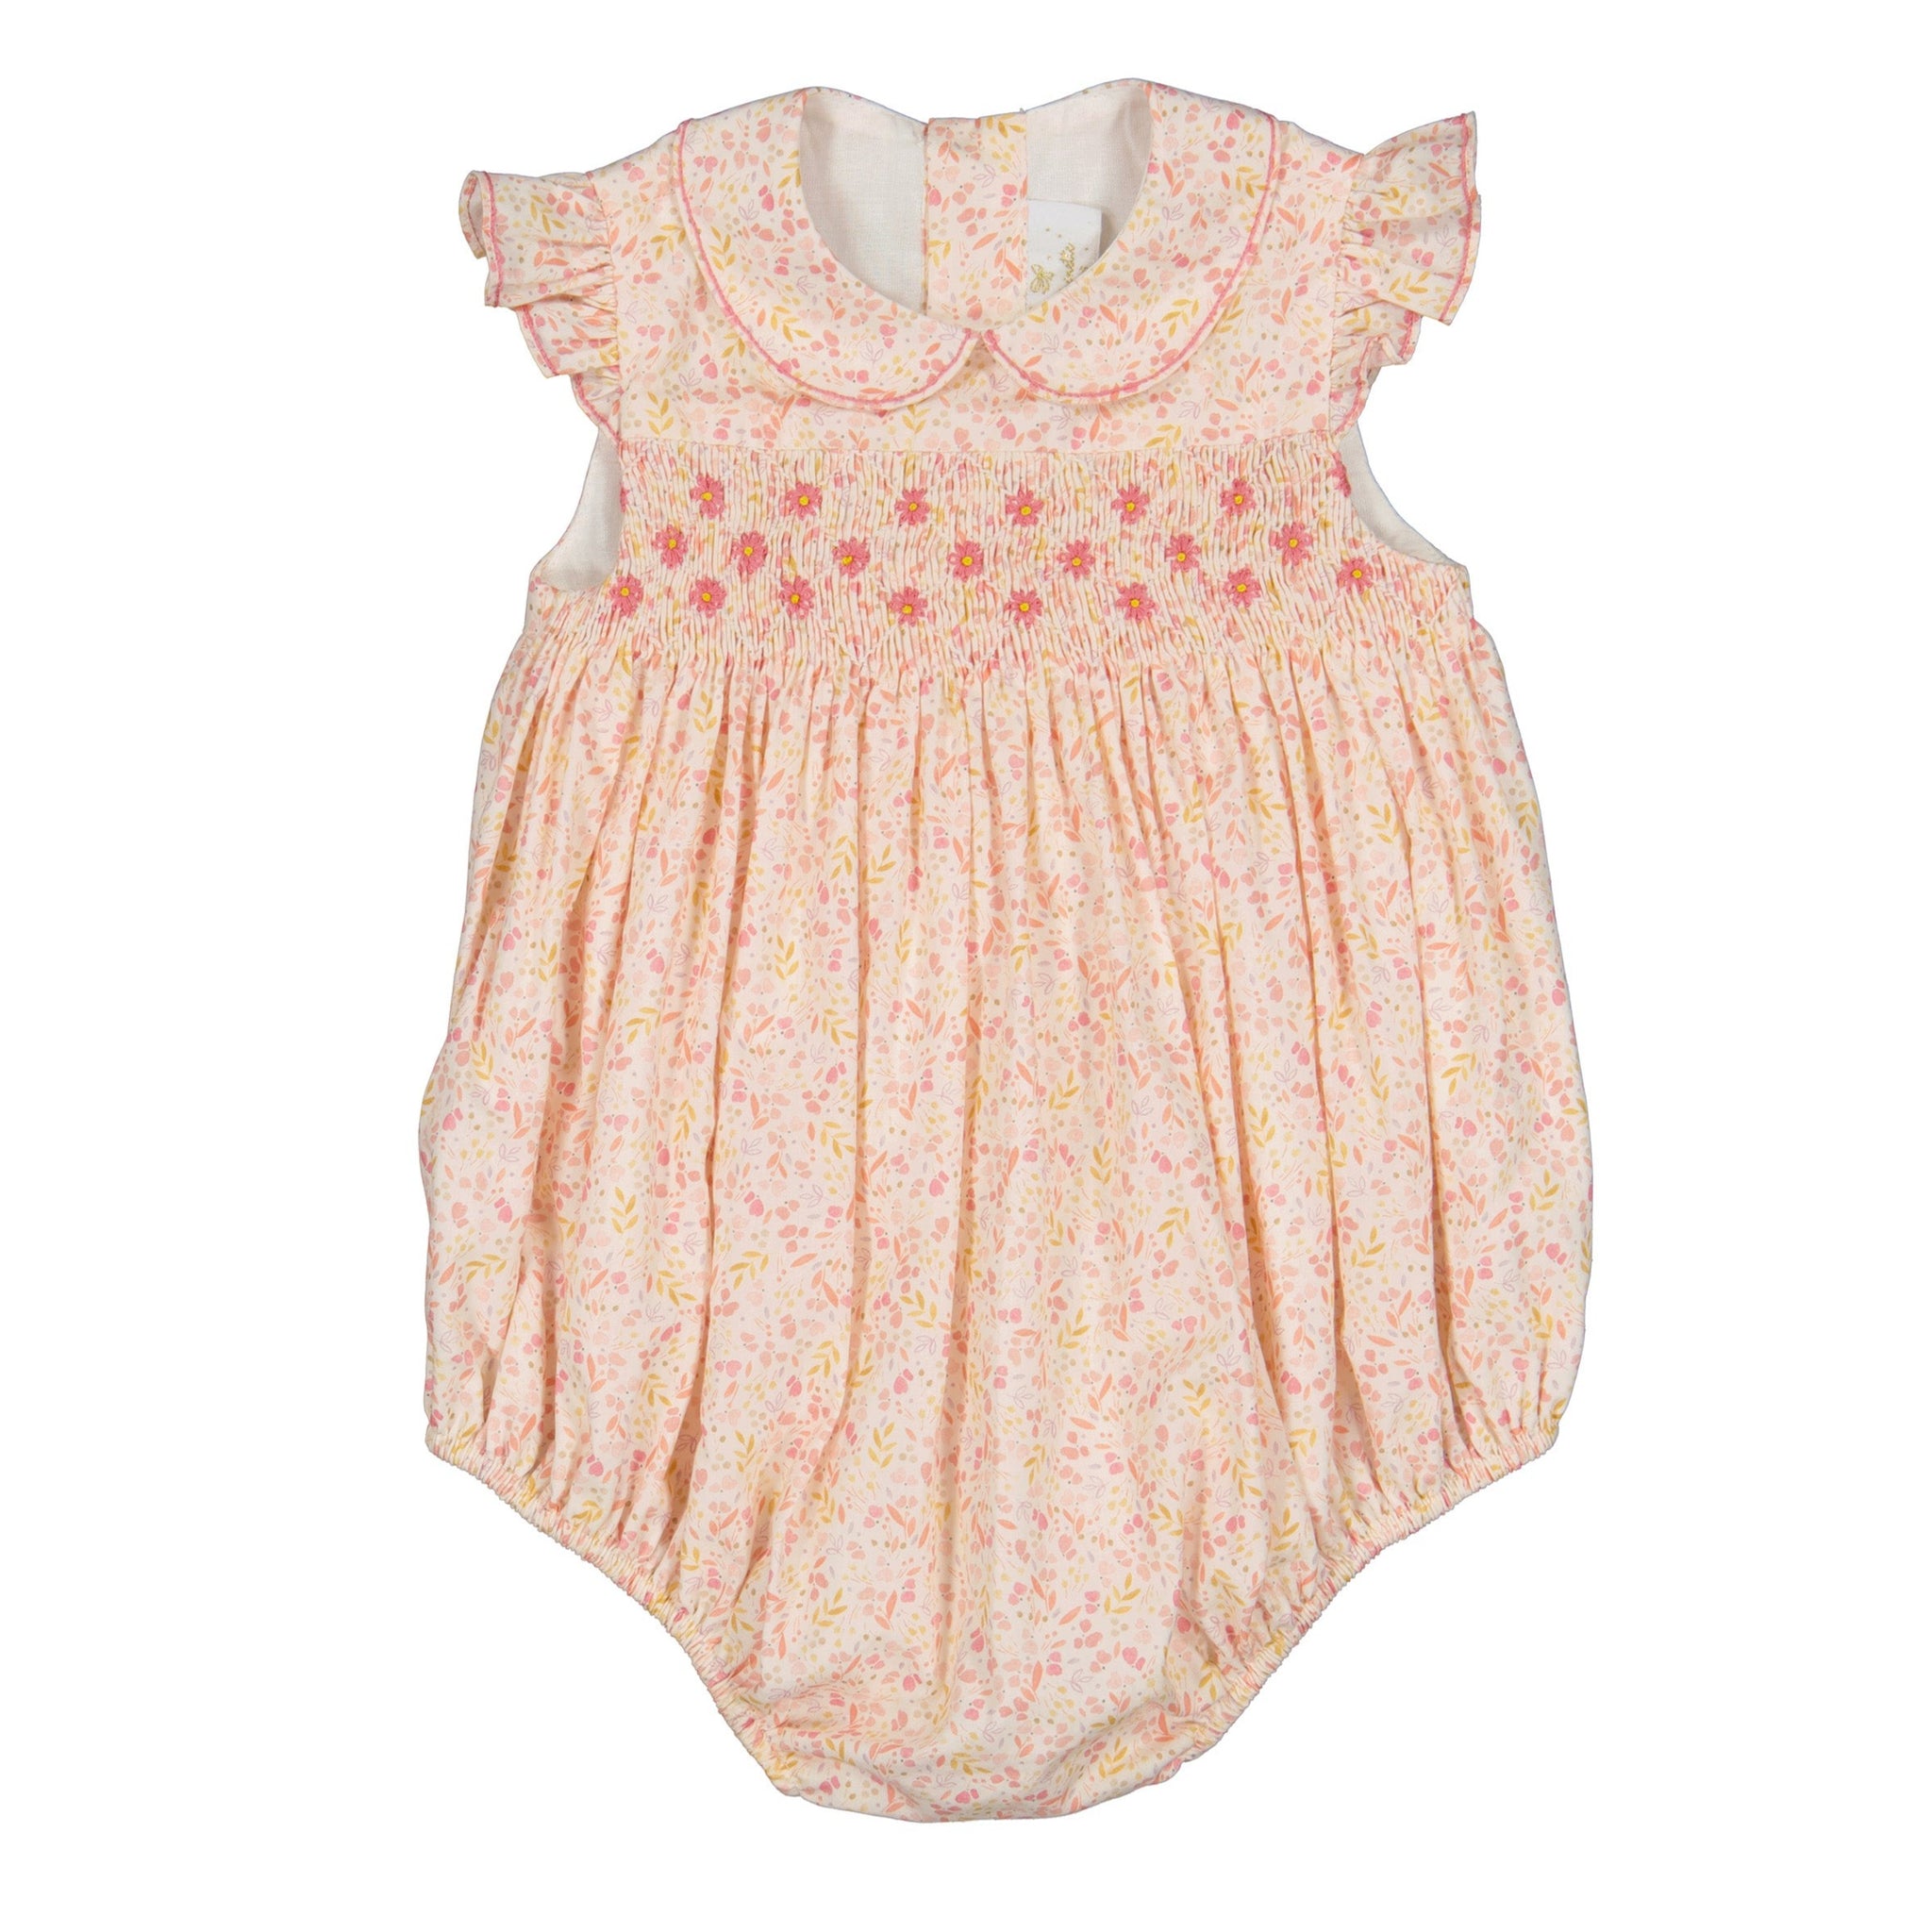 COSMOS PINK FLORAL SMOCKED BUBBLE